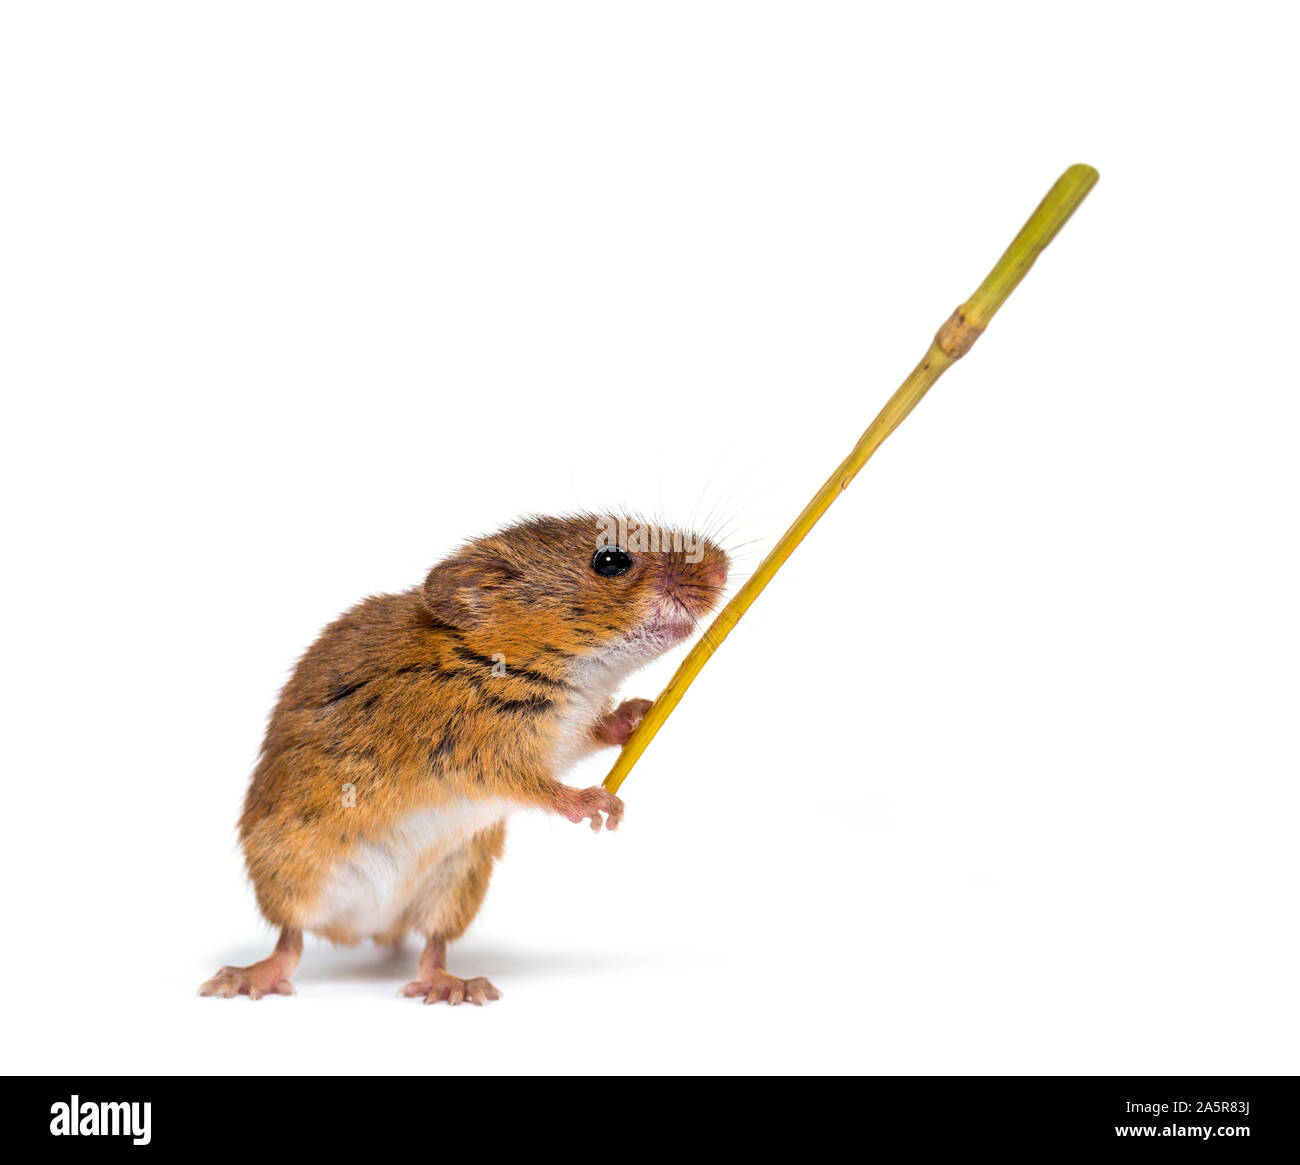 Eurasian harvest mouse, Micromys minutus, holding twig in front of white background Stock Photo